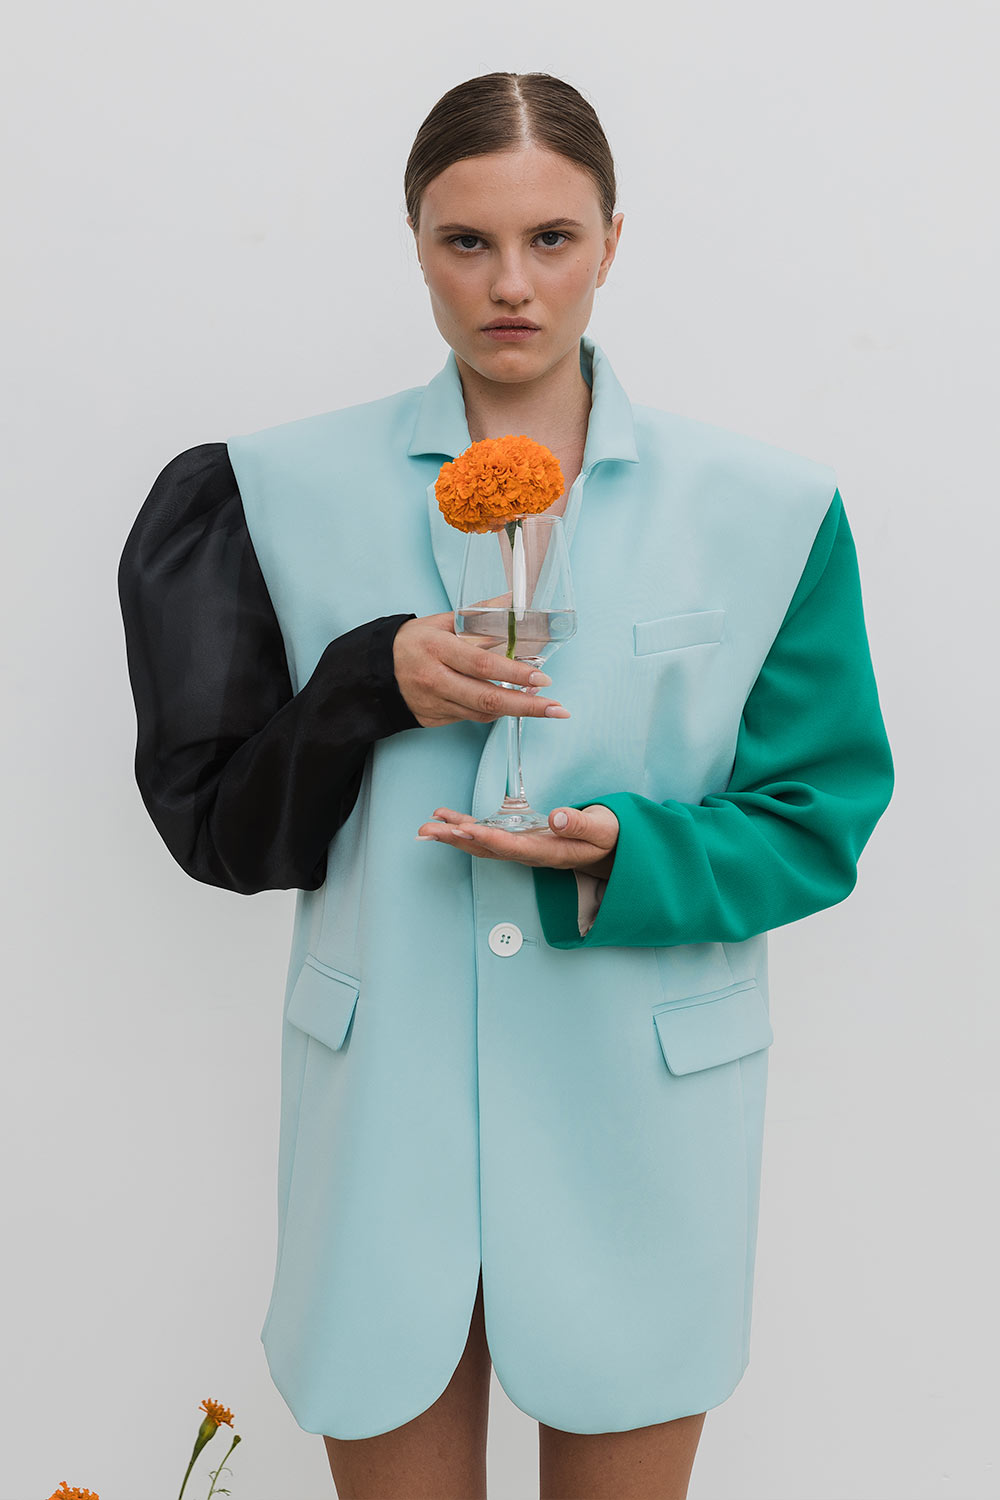 Jacket-constructor, mint blue, black organza, green front view